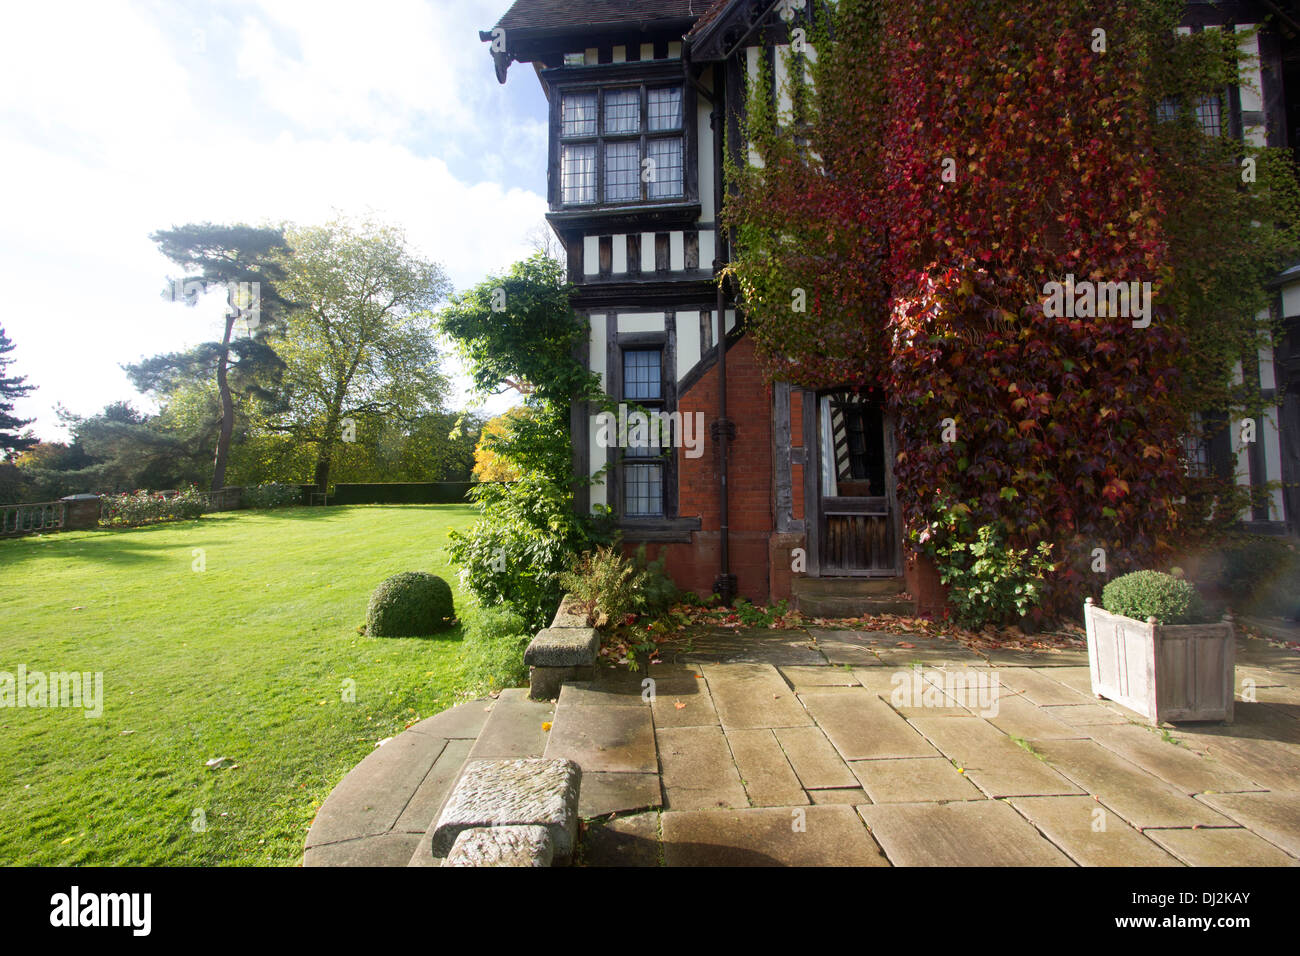 Wightwick Manor is a Victorian manor house located on Wightwick Bank, Wolverhampton, West Midlands, England. Stock Photo